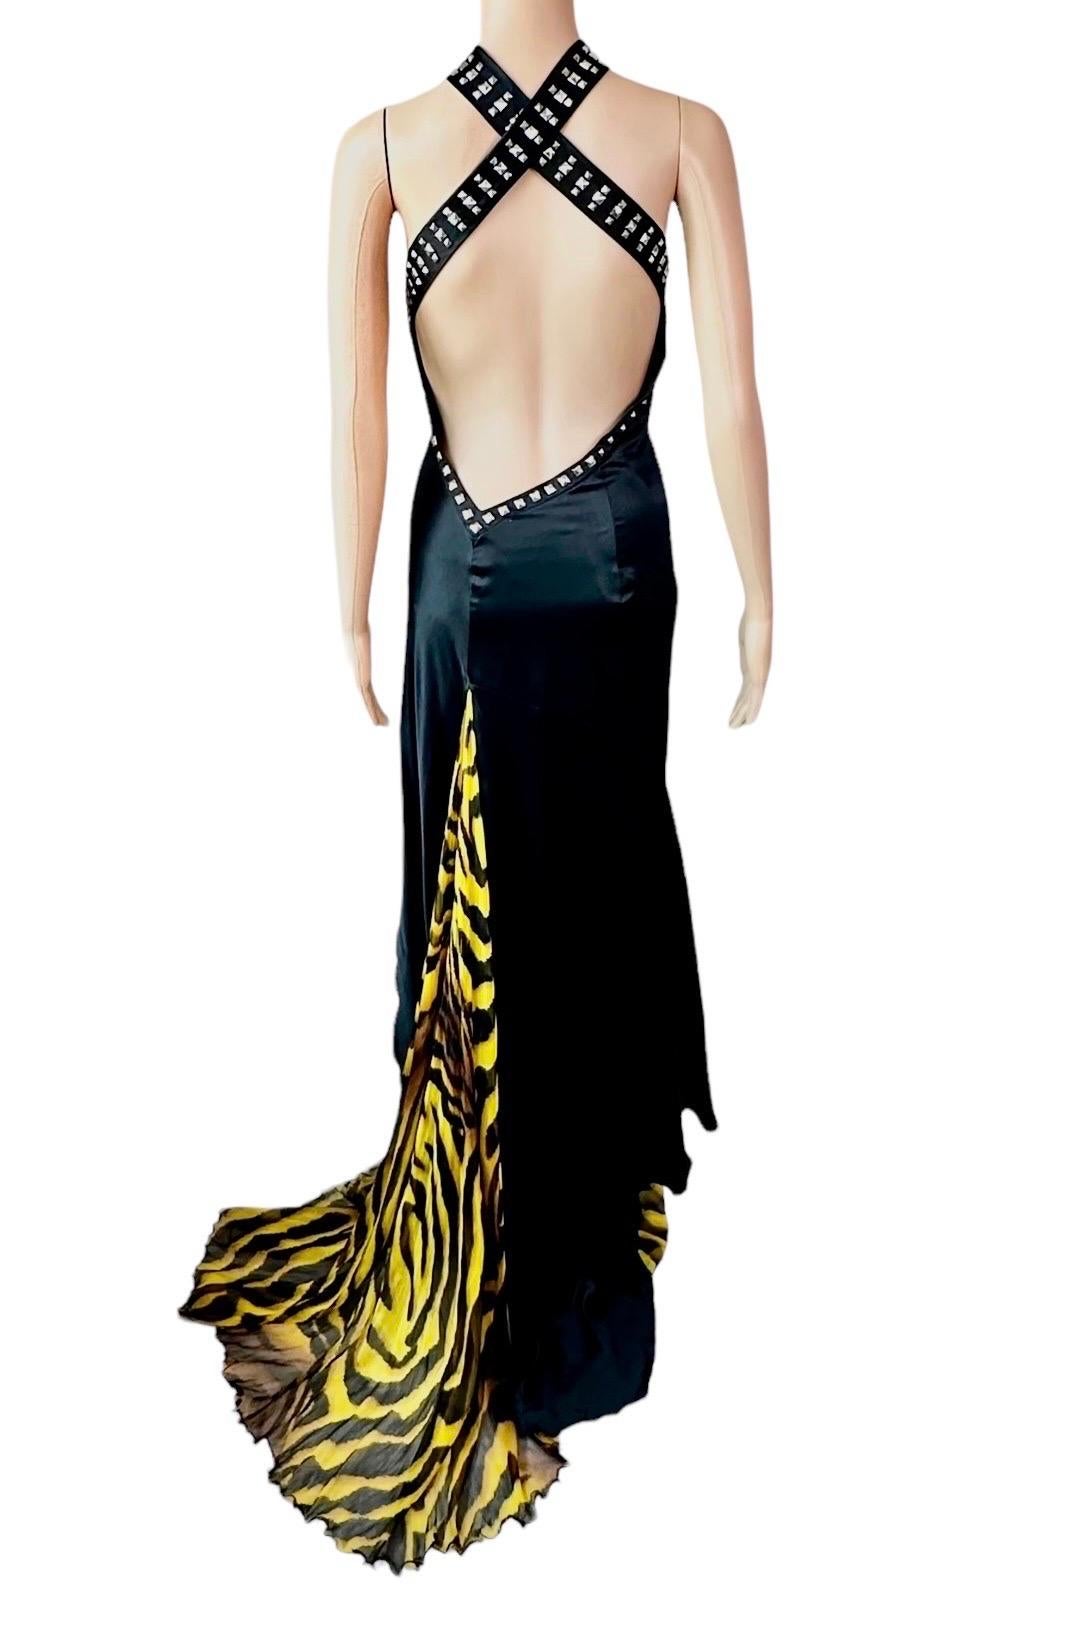 Versace F/W 2004 Runway Studded Plunging Keyhole Neckline Evening Dress Gown For Sale 3